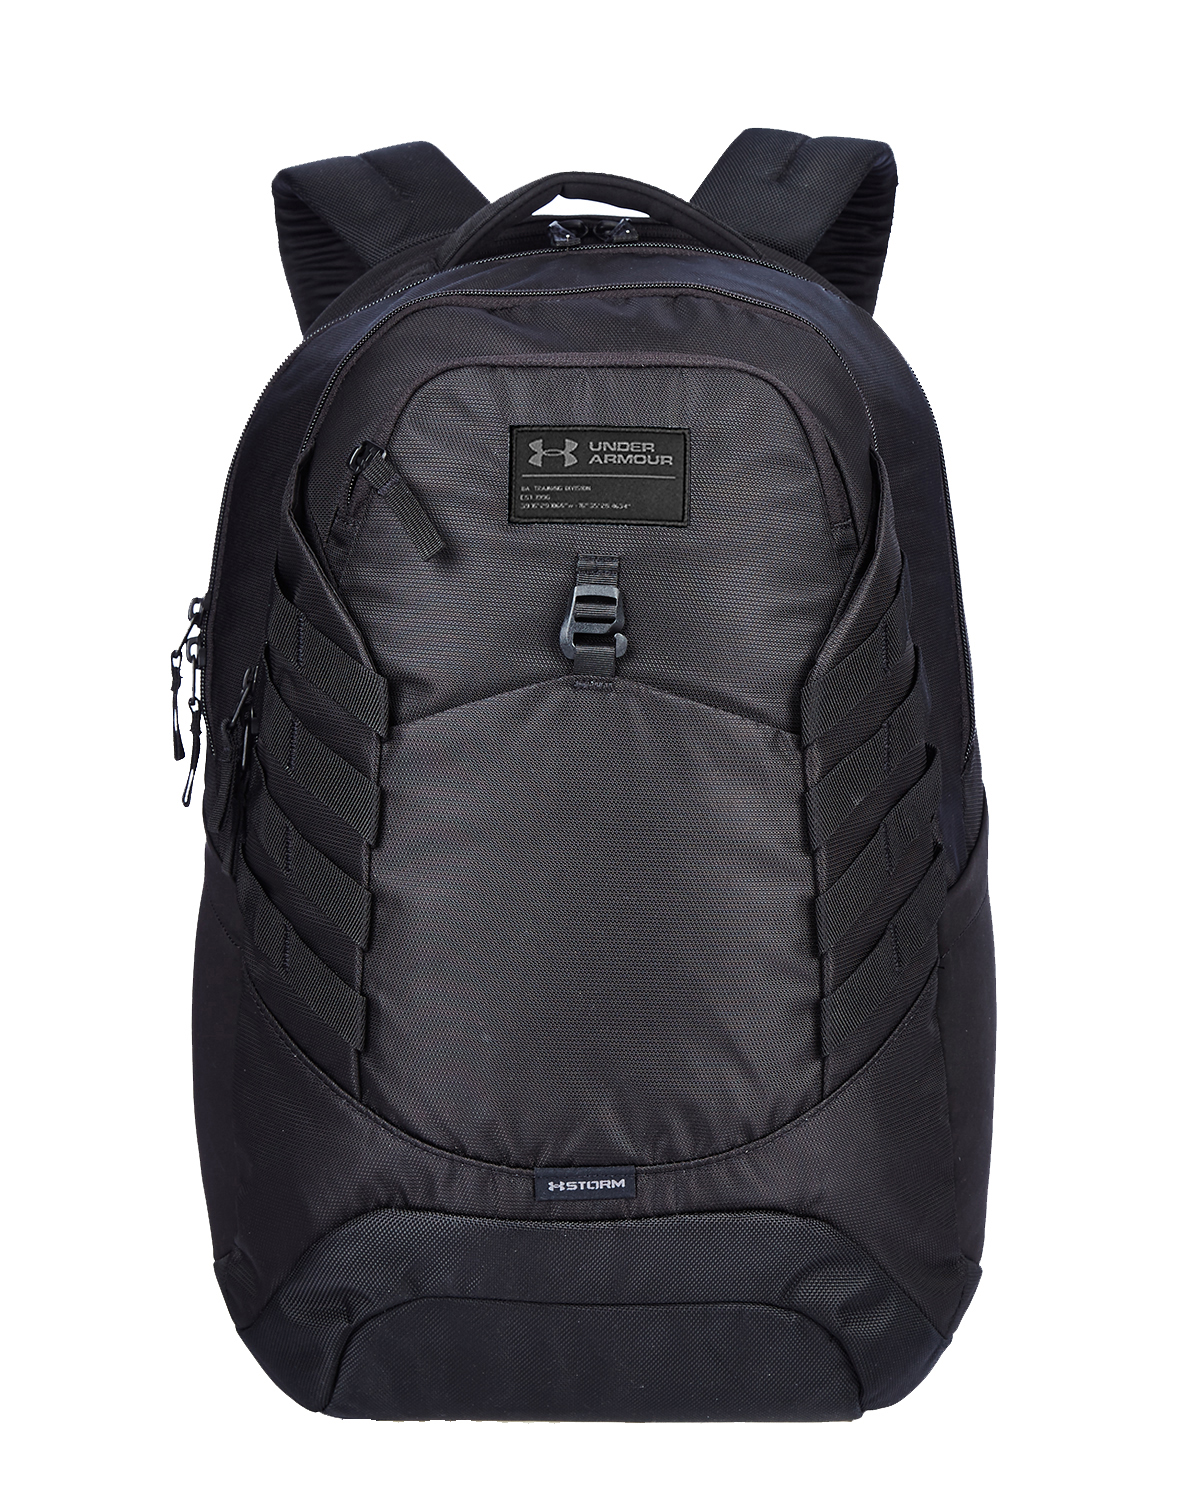 Under Armour 1319909 - Unisex Corporate Hudson Backpack